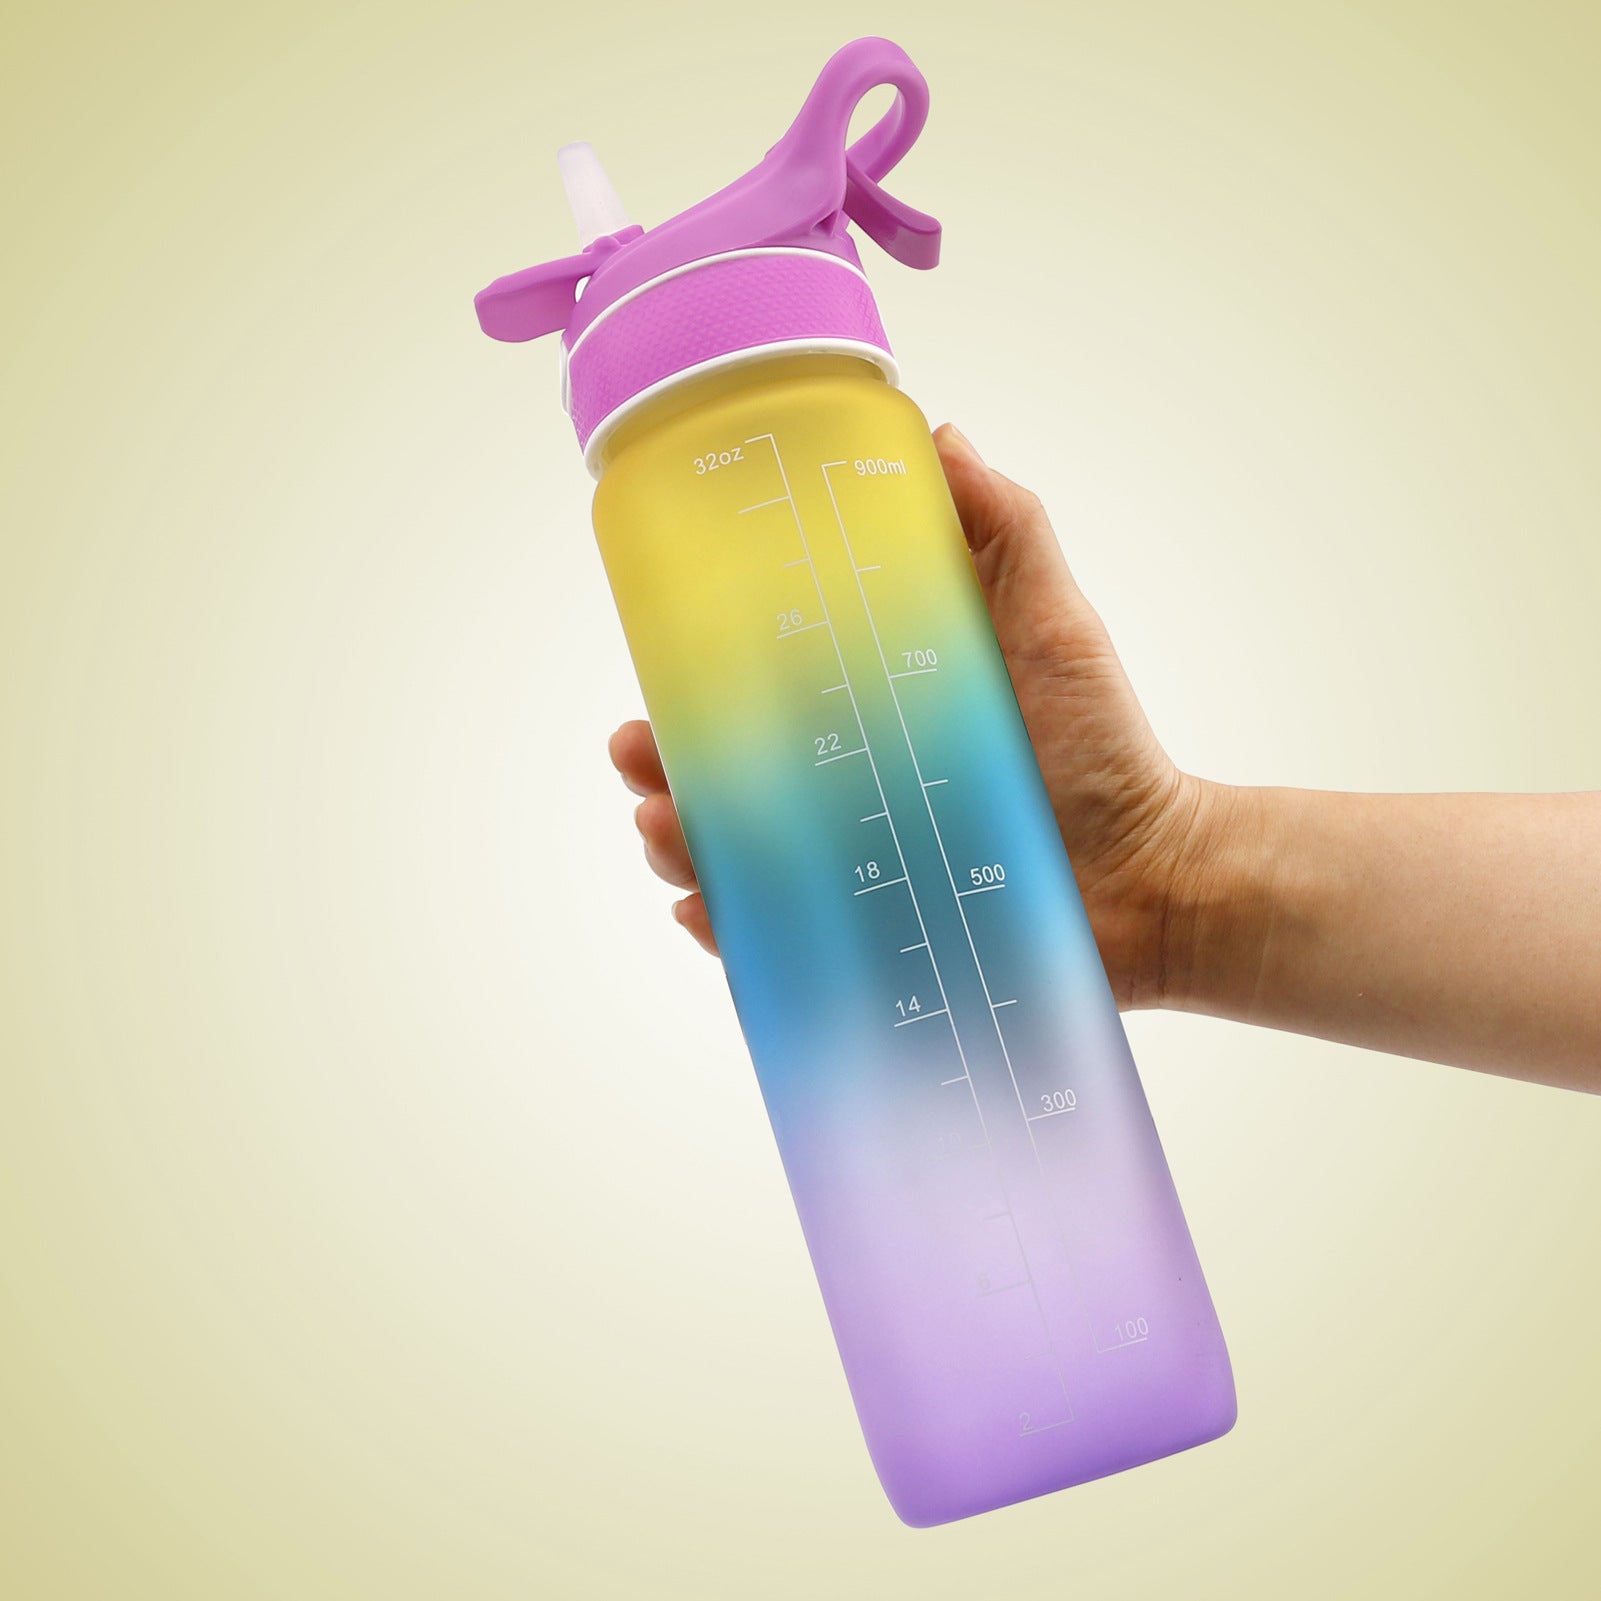 1000ML Plastic Spray Water Bottle Scrub Bounce Cover Straw Space Cup Sports Water Bottle - Shipfound